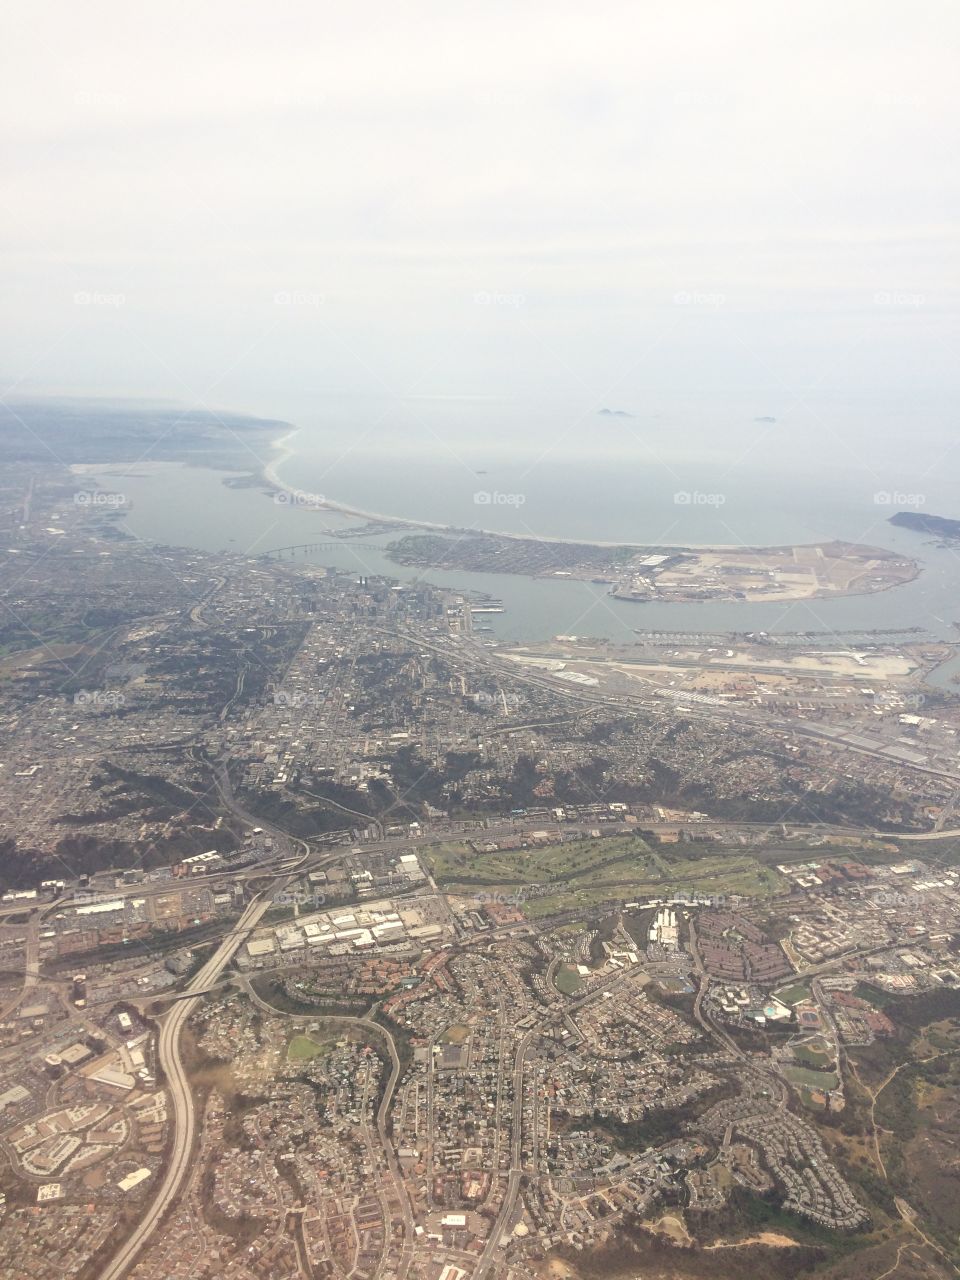 San Diego from the air